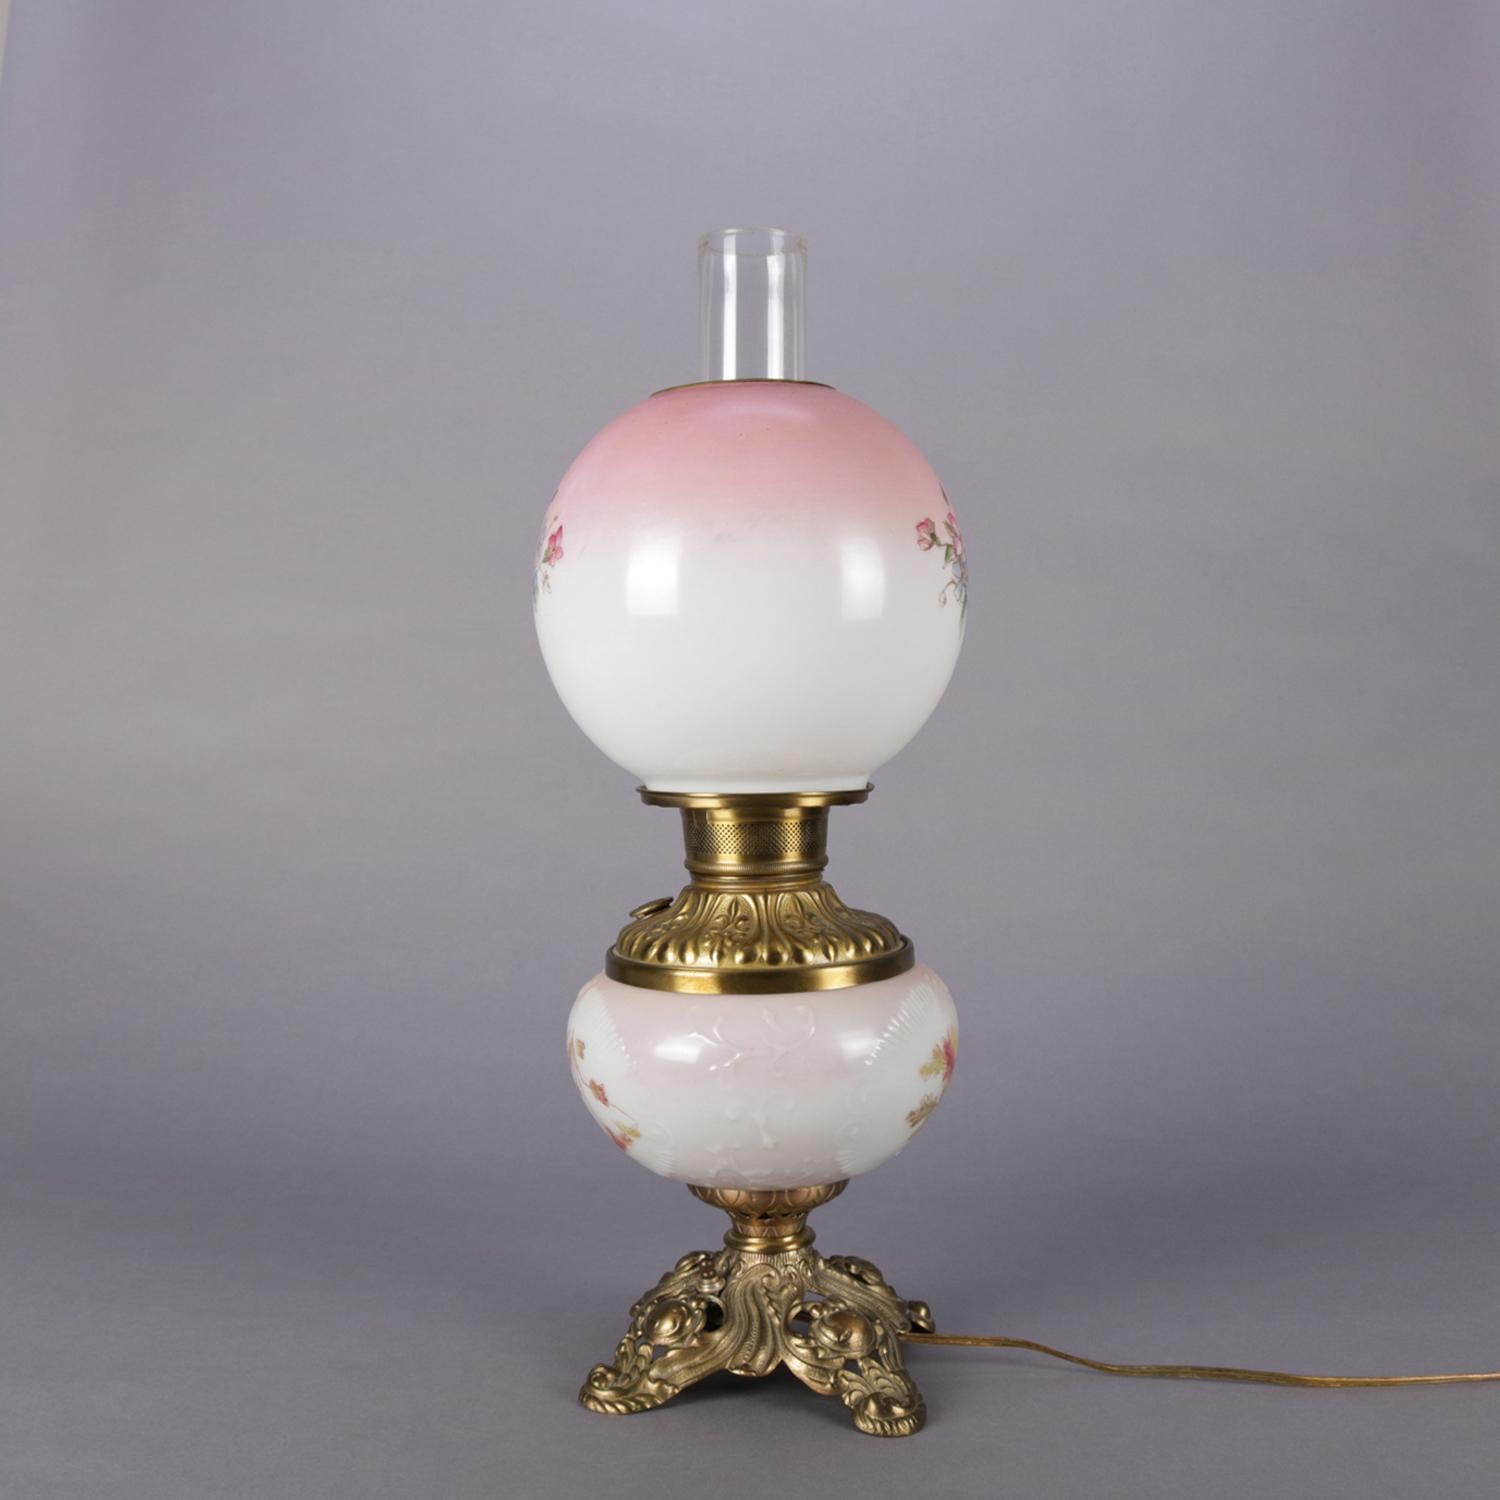 Antique electrified gone with the wind table lamp features hand-painted globe and font with floral spray roses raised on pierced and footed base, circa 1890.

Measures: 22